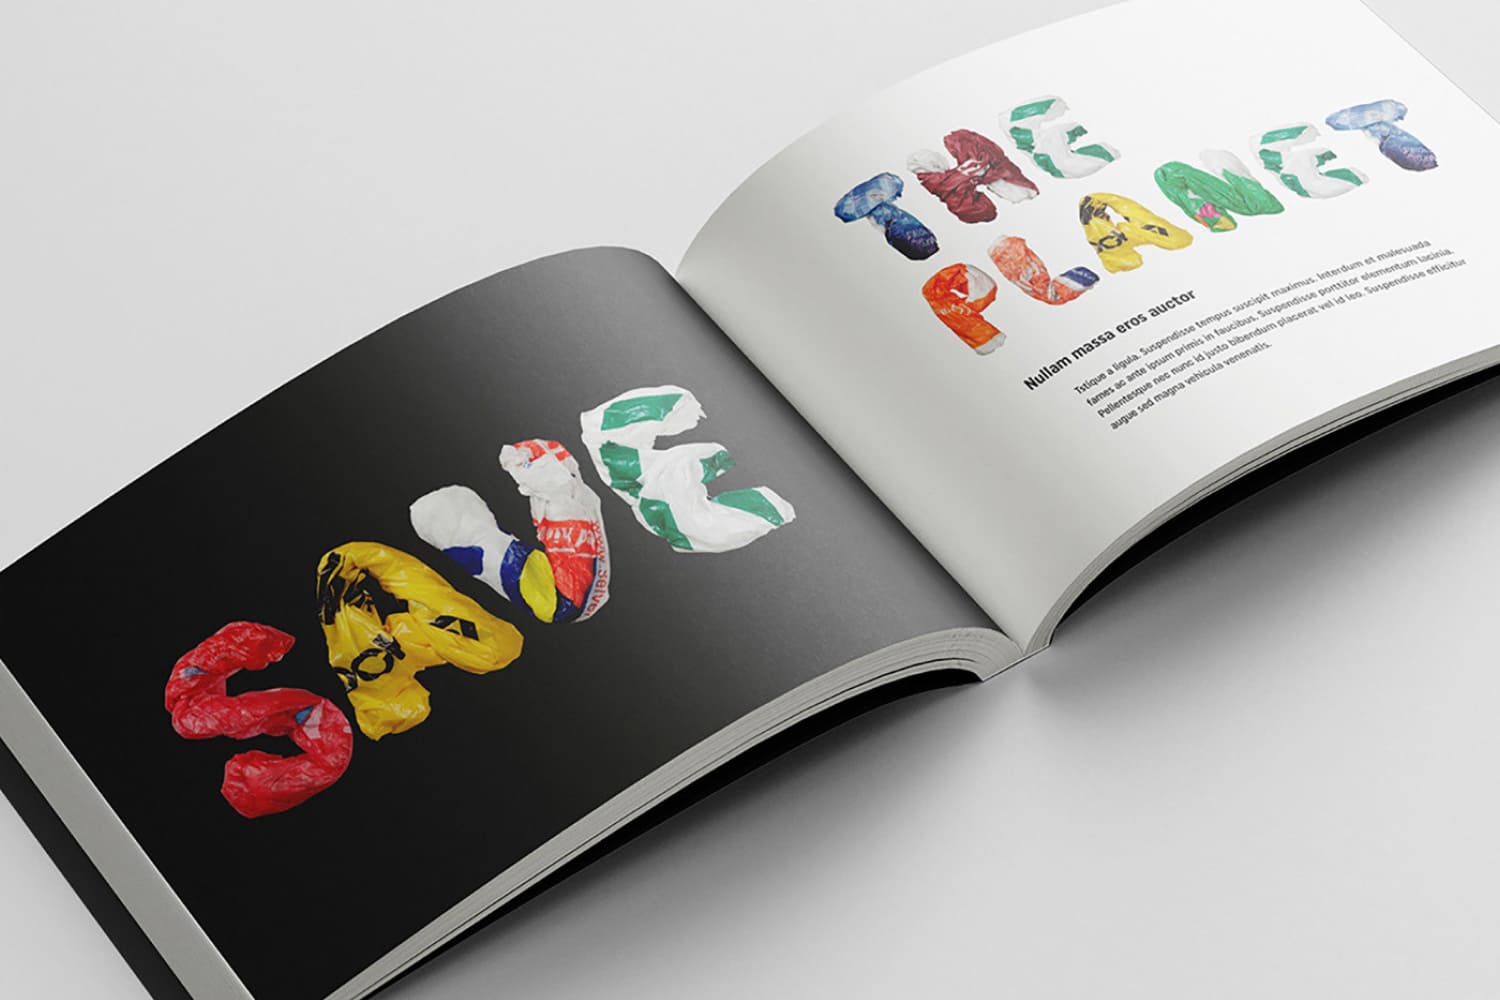 Book spread with large letters from colored bags.